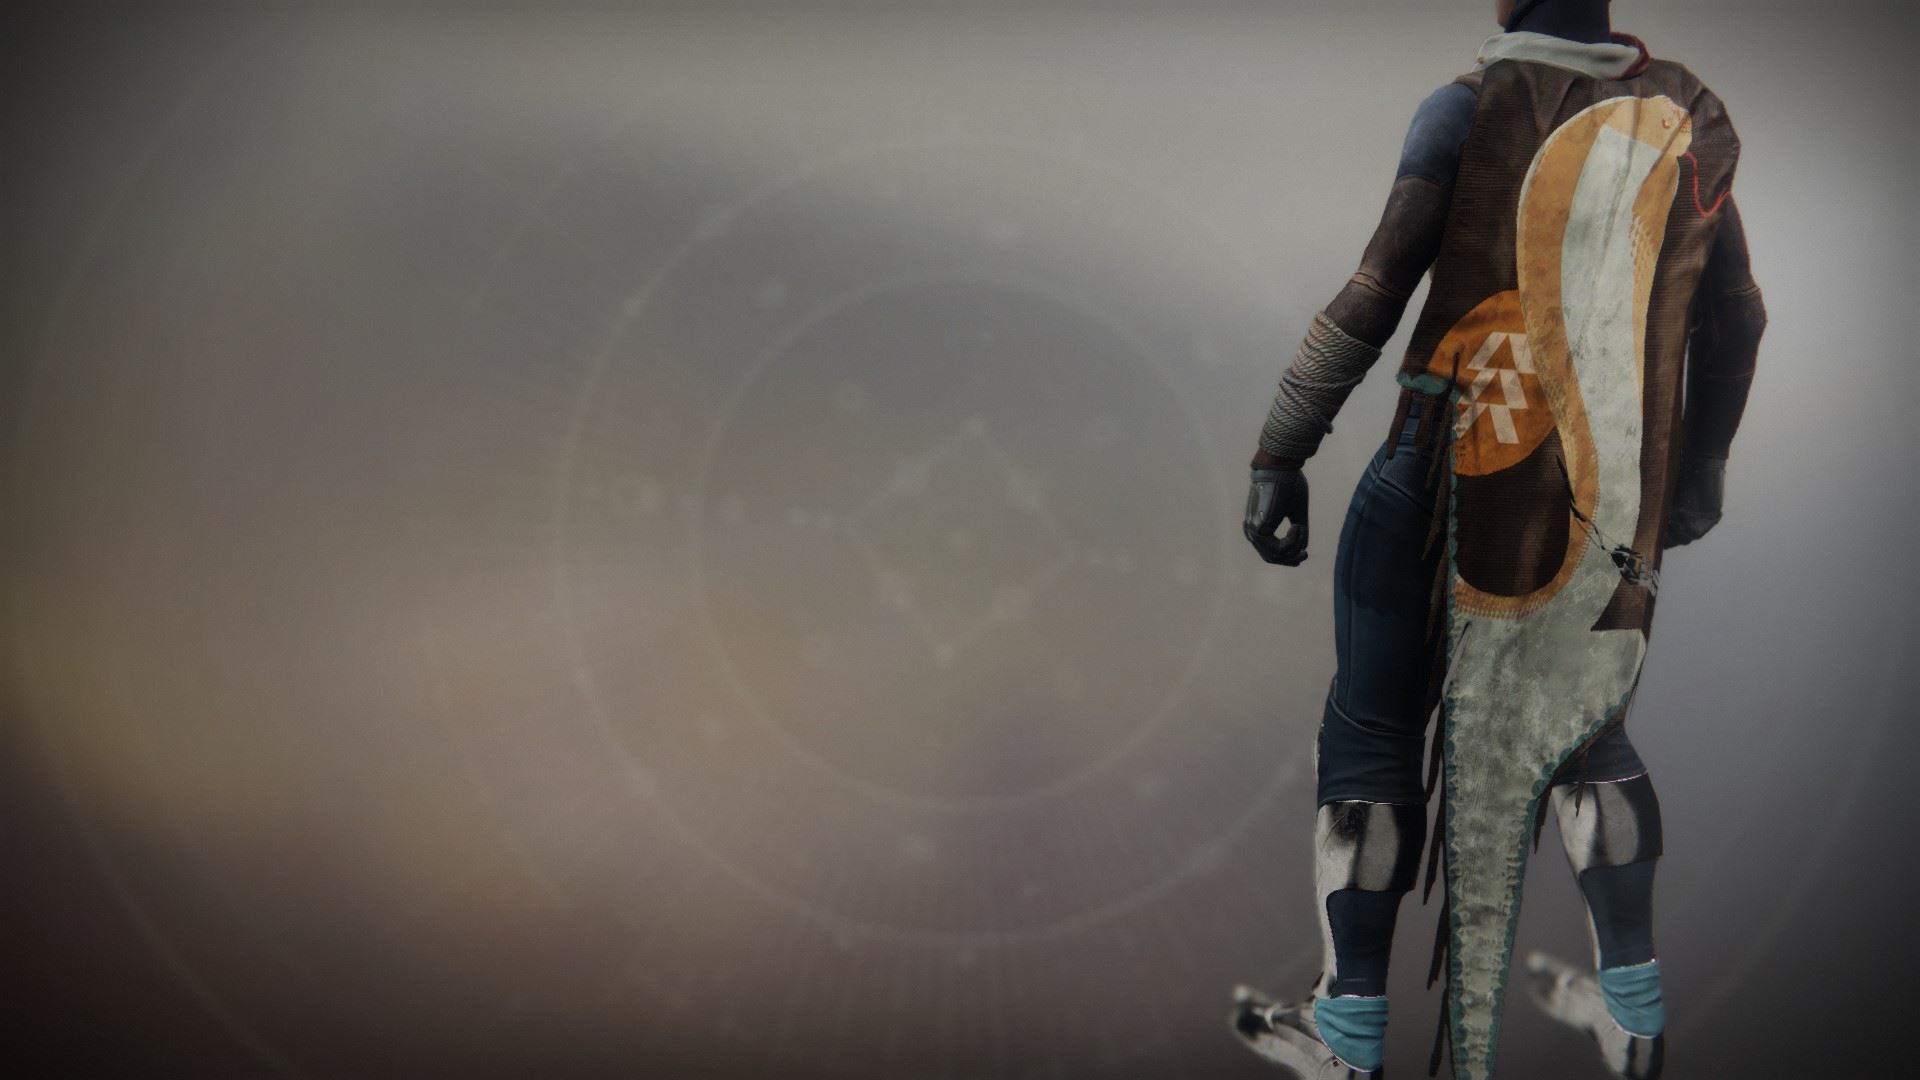 An in-game render of the Ancient Apocalypse Cloak.